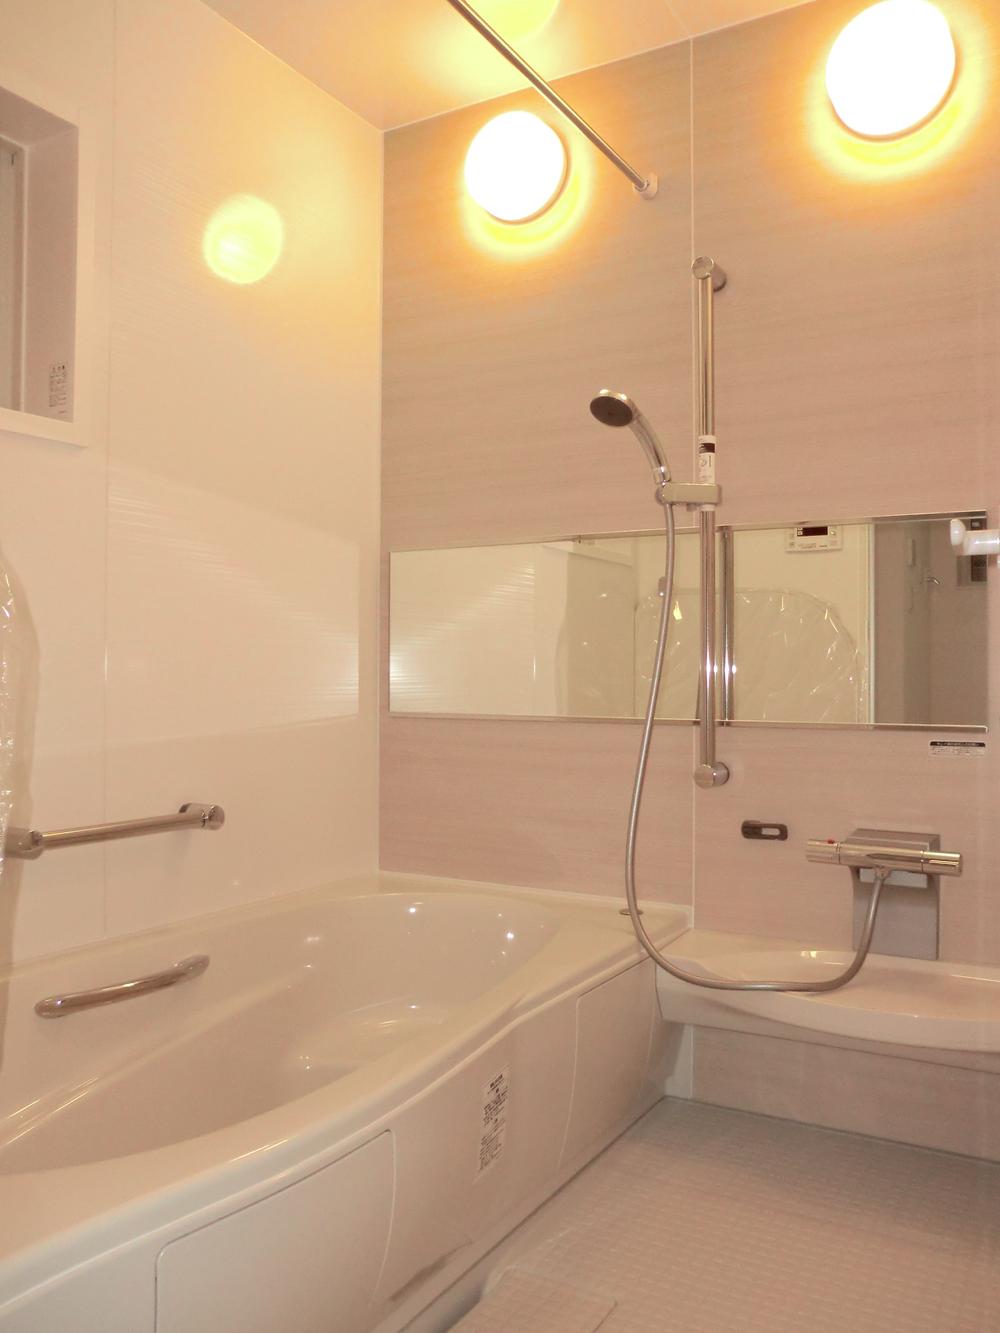 Same specifications photo (bathroom). It will be in the same specification photo of bathroom. Bathroom dryer with bathroom is clean and easy Kururin poi drainage port! 1616 spacious bathtub size, Hard to feel the cold floor = is thermo floor.